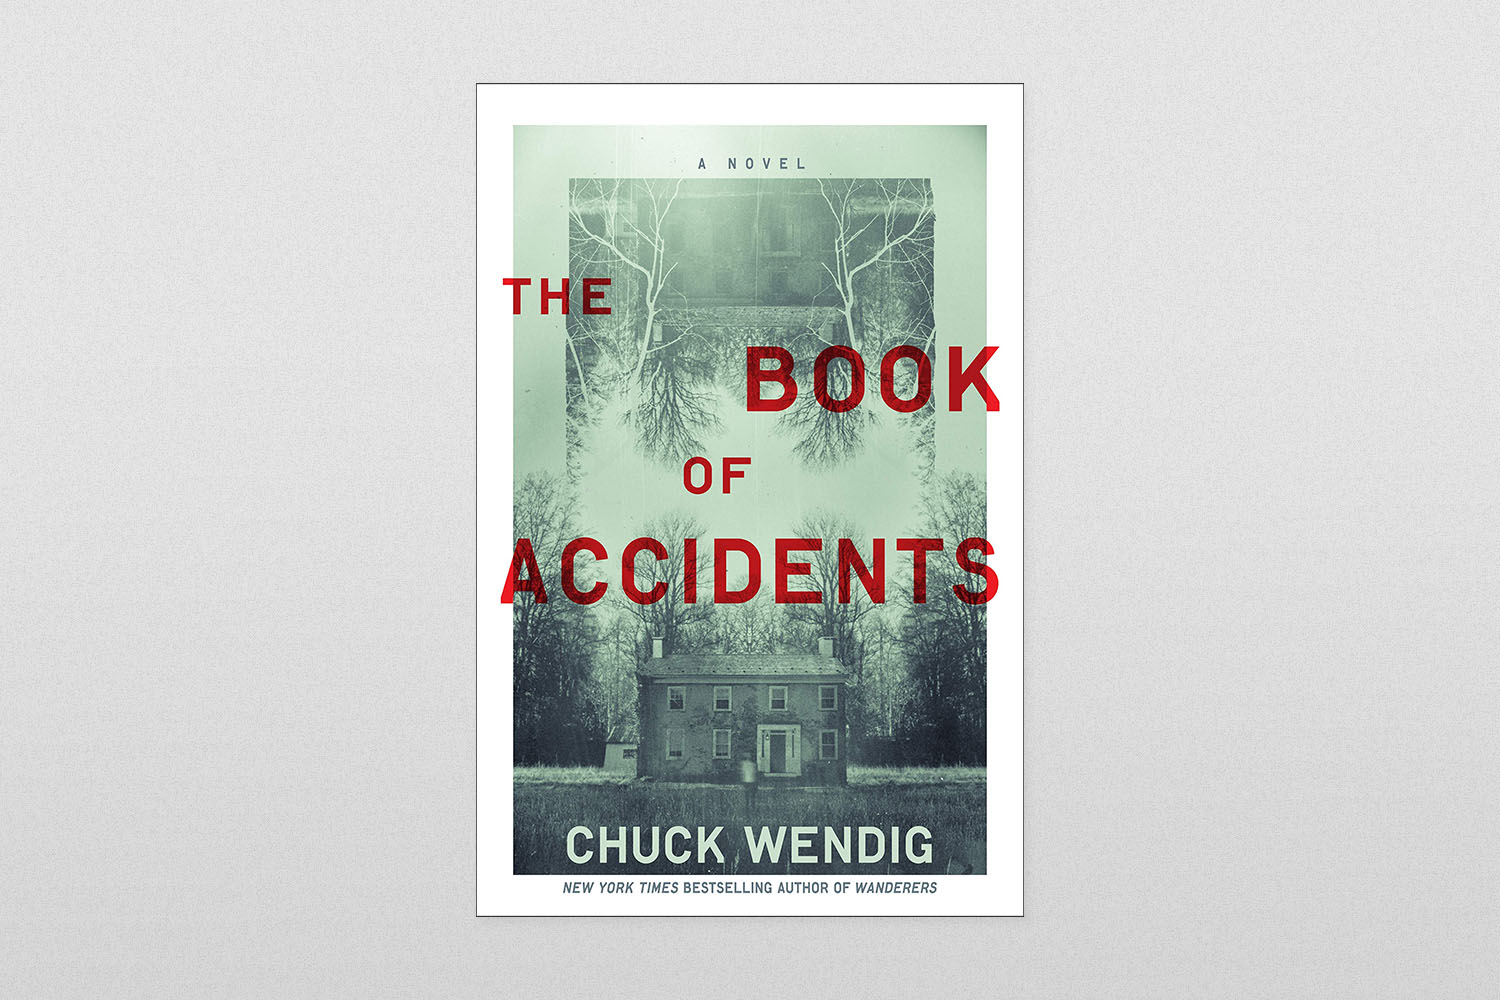 "The Book of Accidents"